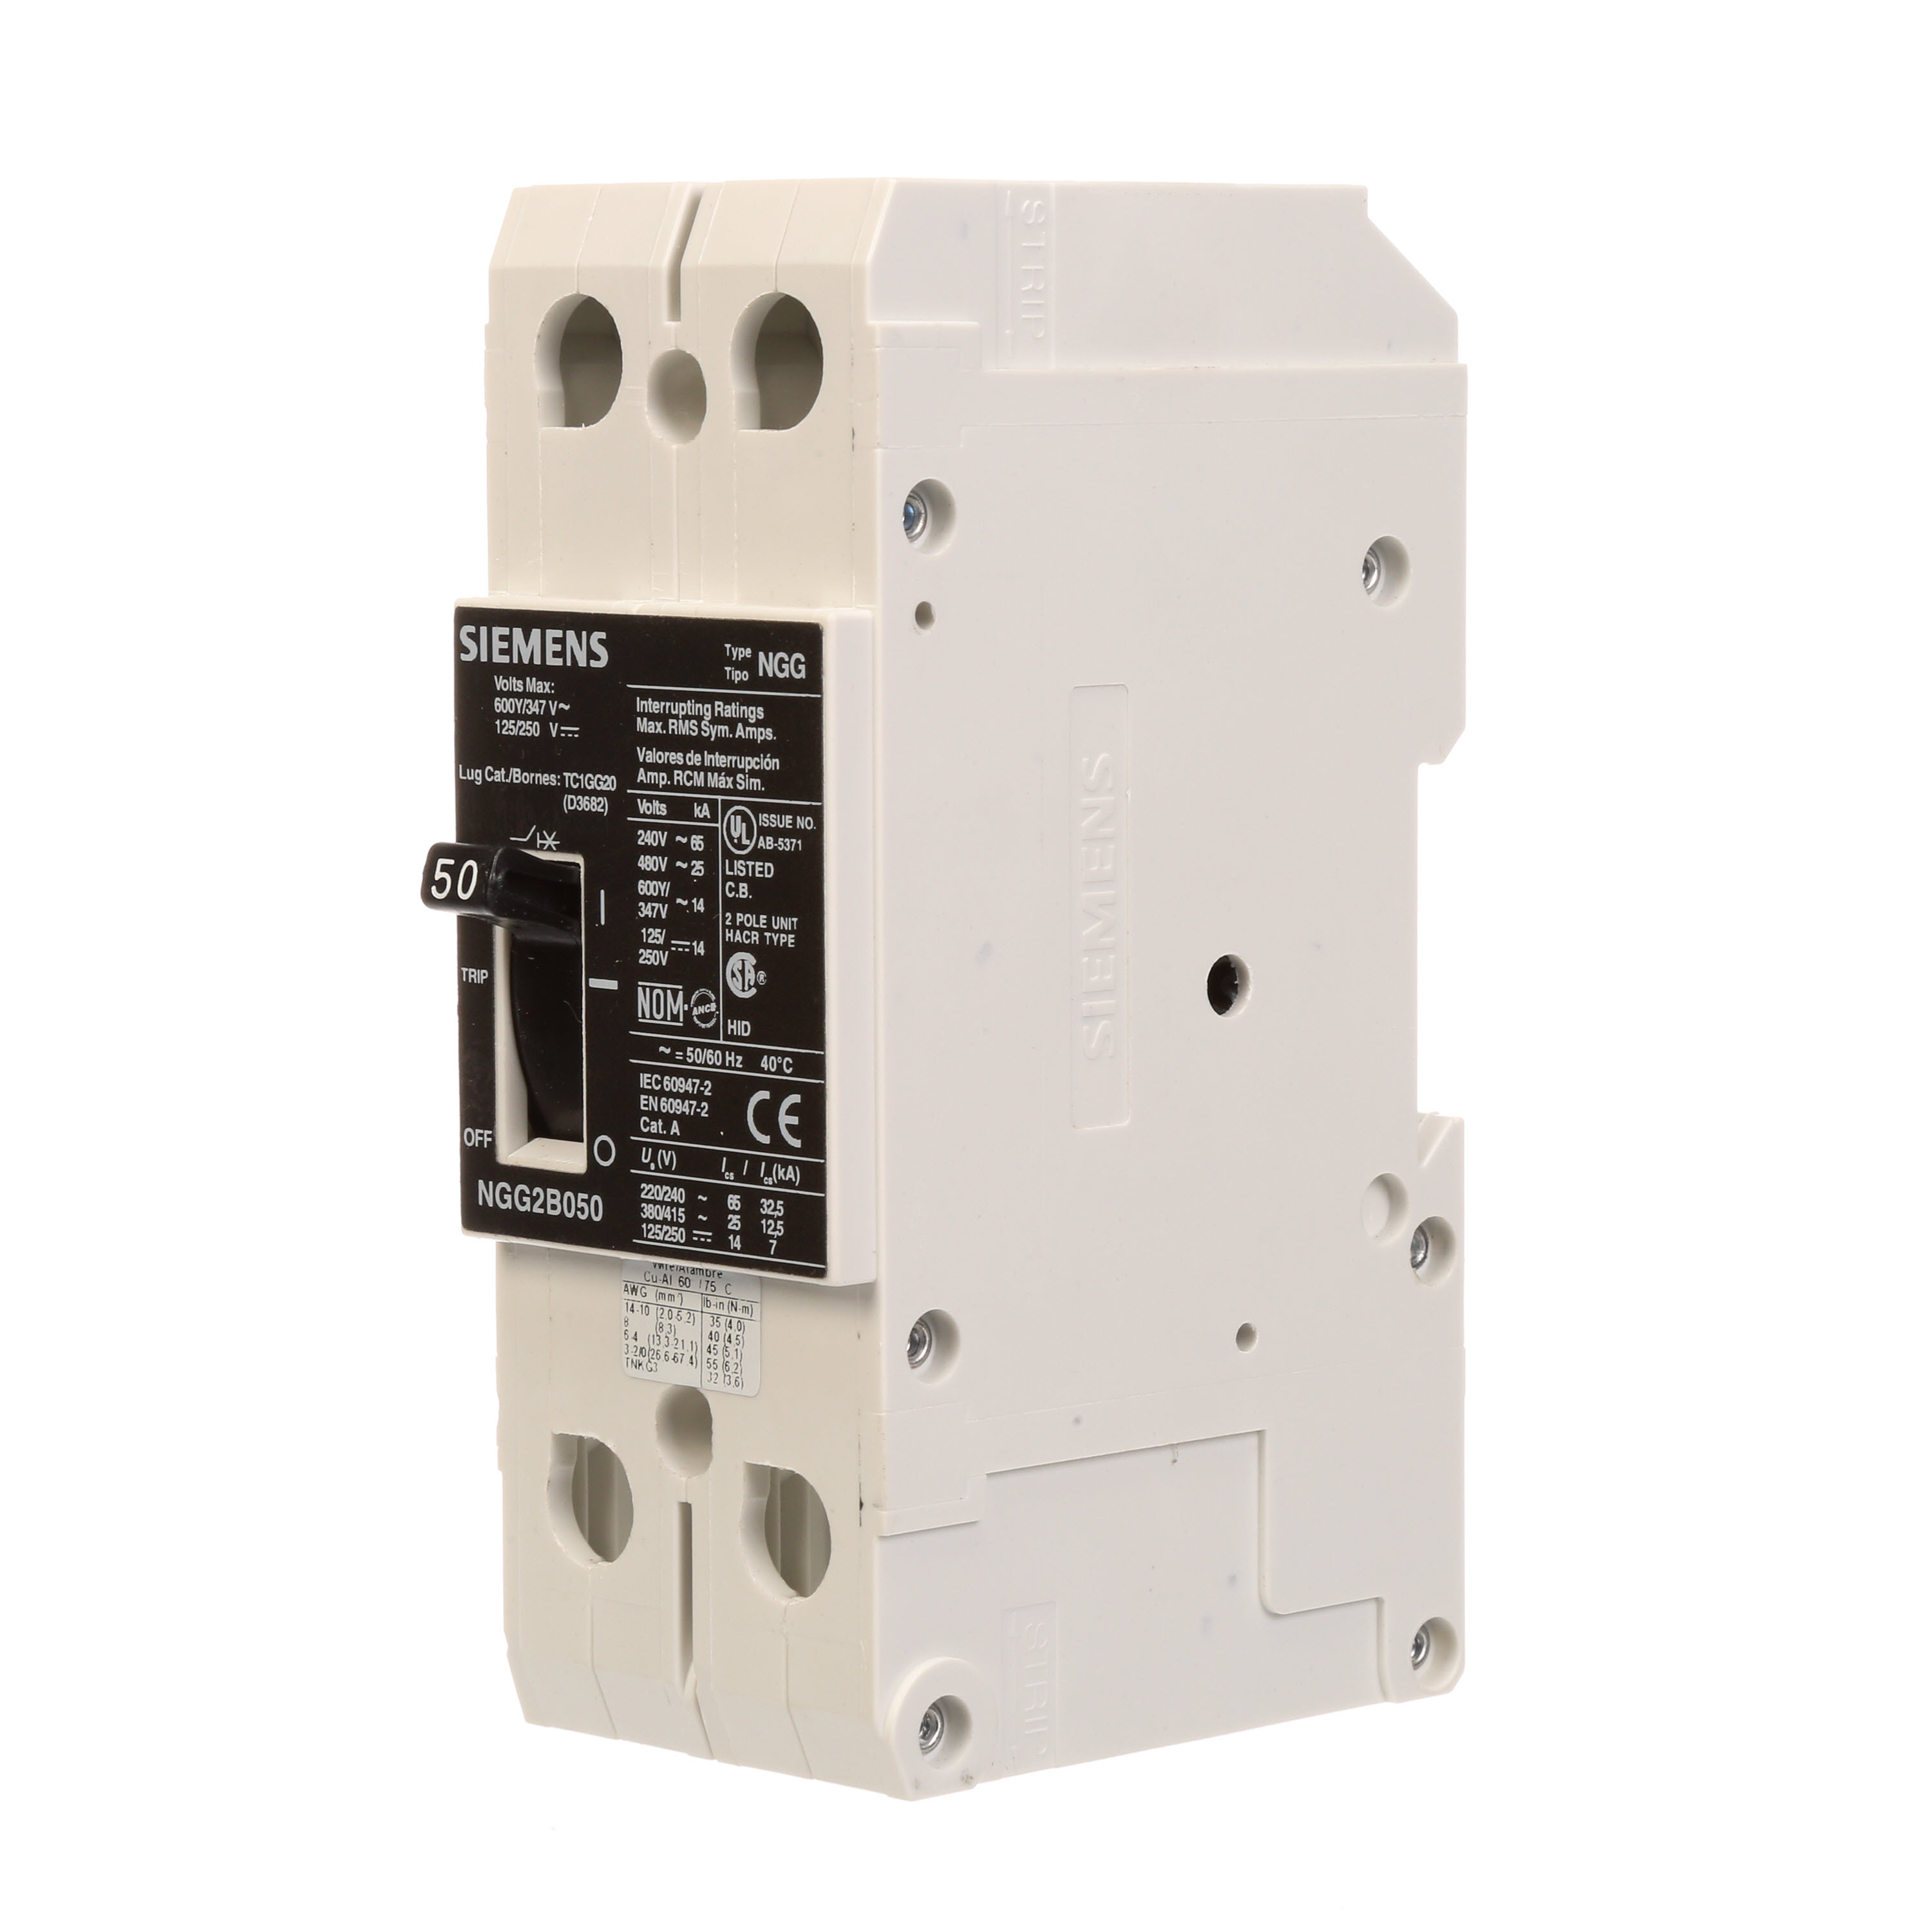 SIEMENS LOW VOLTAGE G FRAME CIRCUIT BREAKER WITH THERMAL - MAGNETIC TRIP. UL LISTED NGG FRAME WITH STANDARD BREAKING CAPACITY. 50A 2-POLE (14KAIC AT 600Y/347V)(25KAIC AT 480V). SPECIAL FEATURES MOUNTS ON DIN RAIL / SCREW, NO LUGS. DIMENSIONS (W x H x D) IN 2 x 5.4 x 2.8.